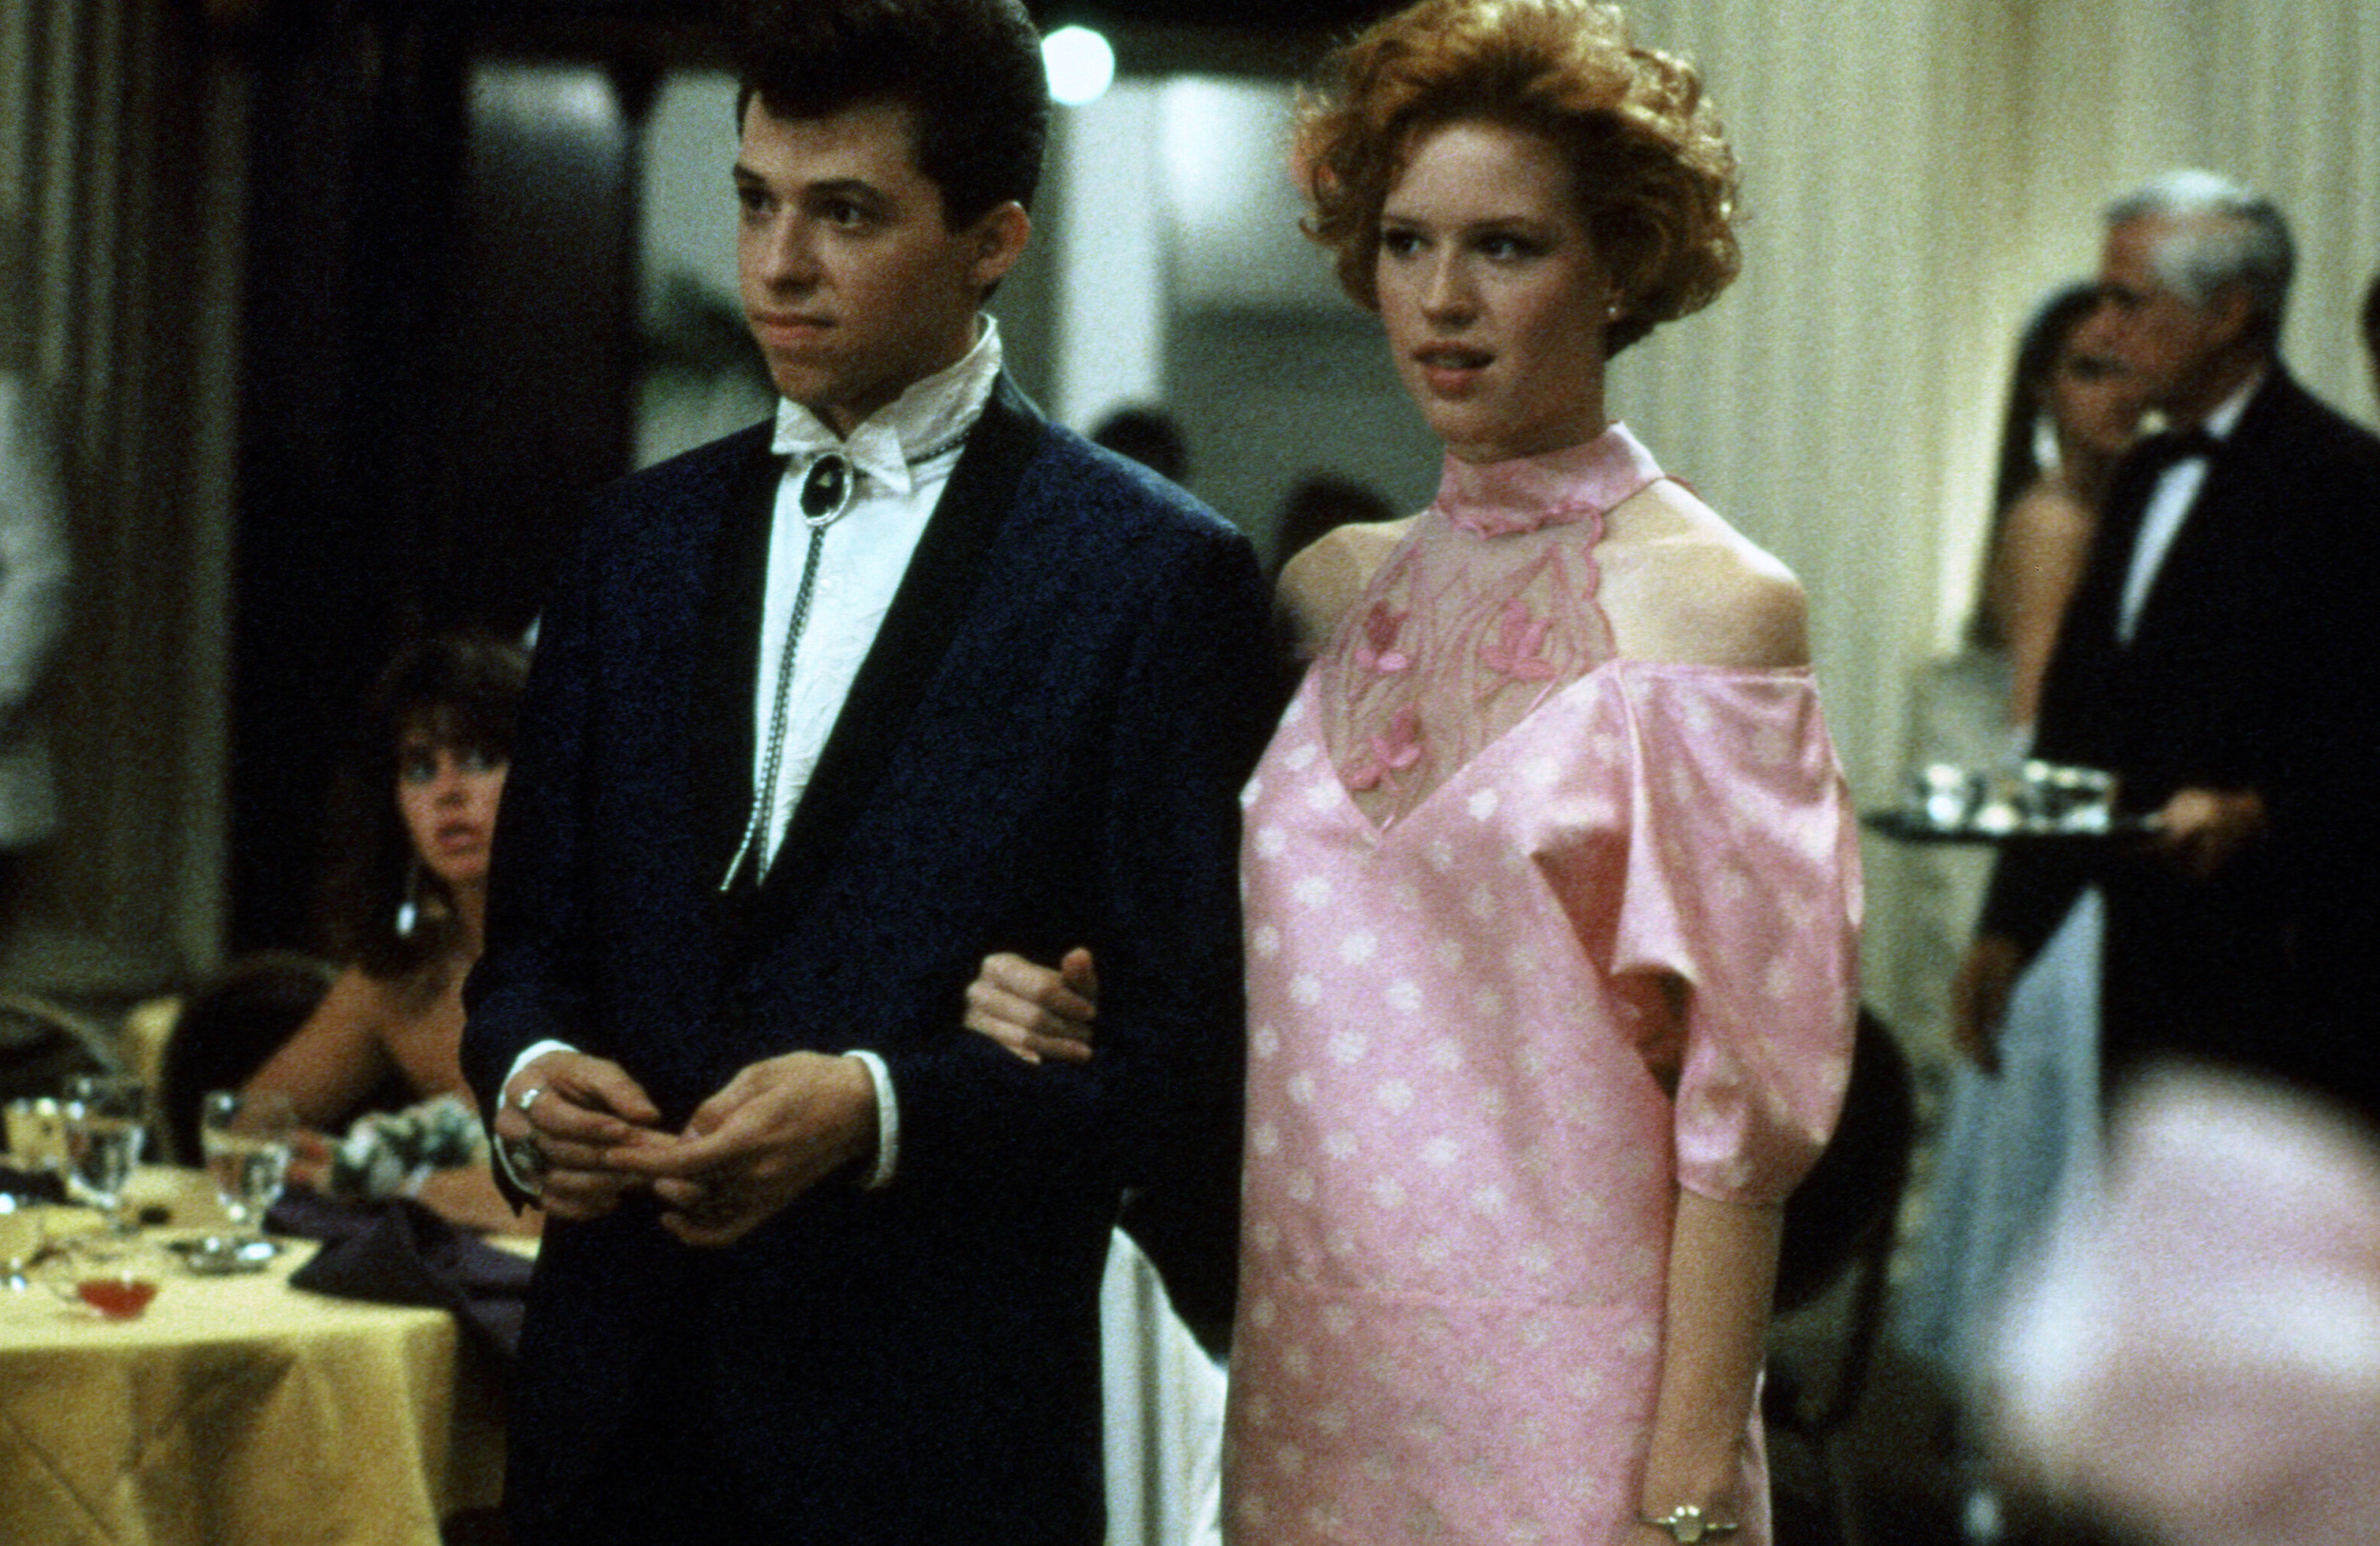 21 of the most iconic dresses in movie history